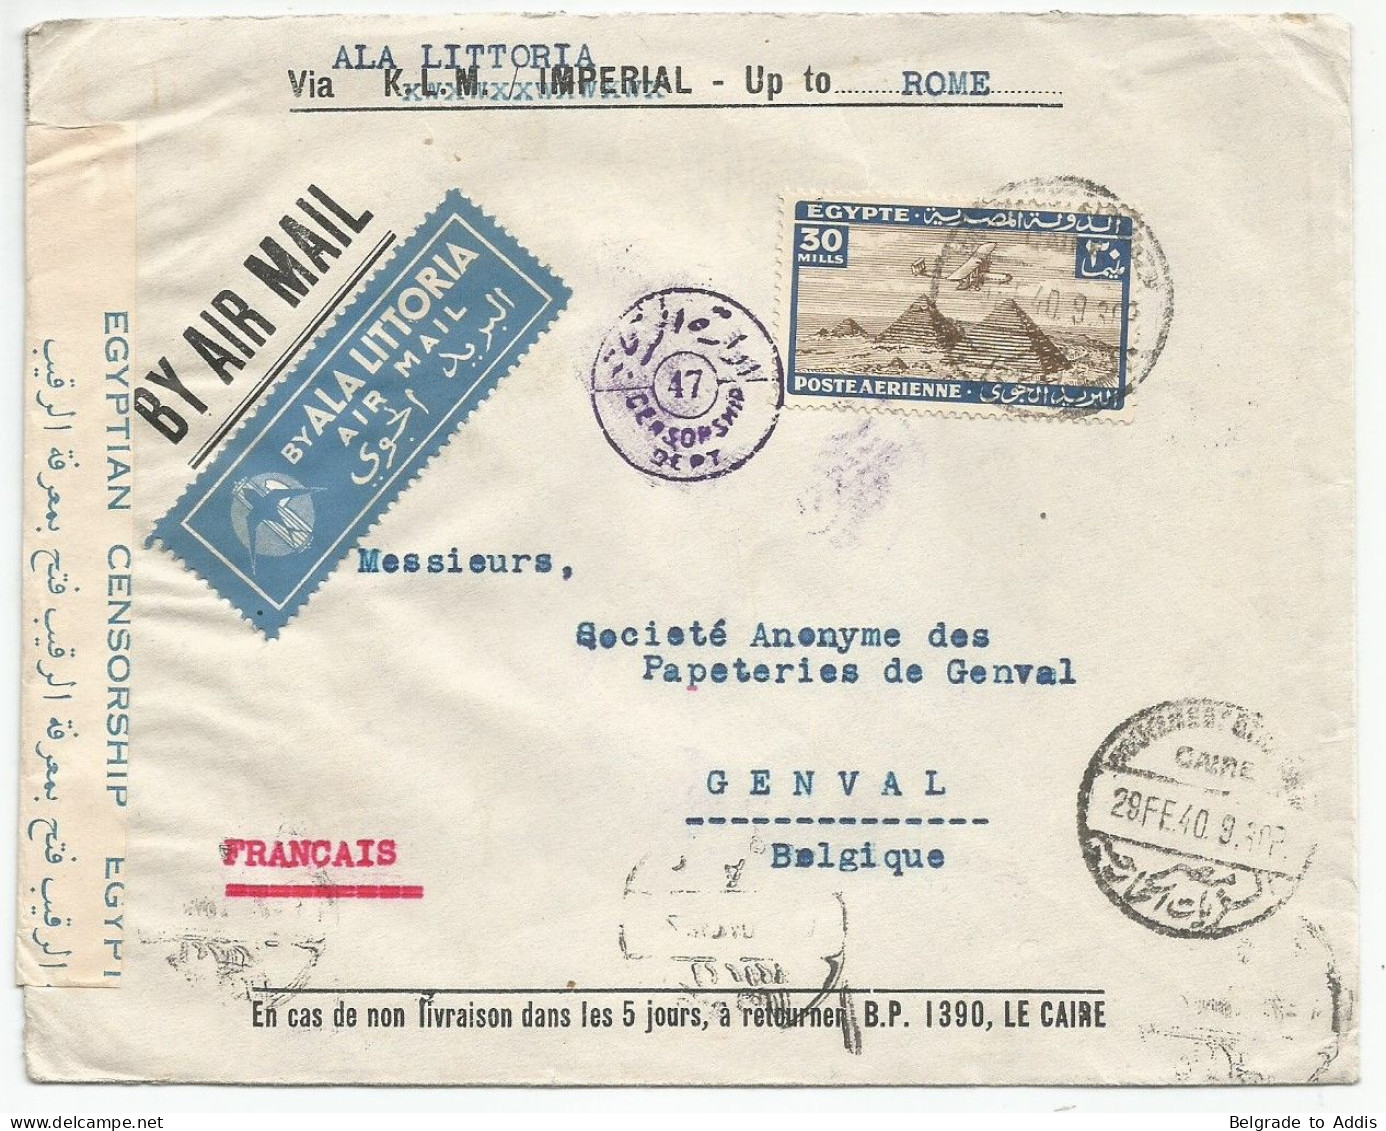 Egypt Air Mail Censored Cover Sent By ALA LITTORIA Via Roma Italy To Belgium 1940 - Luchtpost